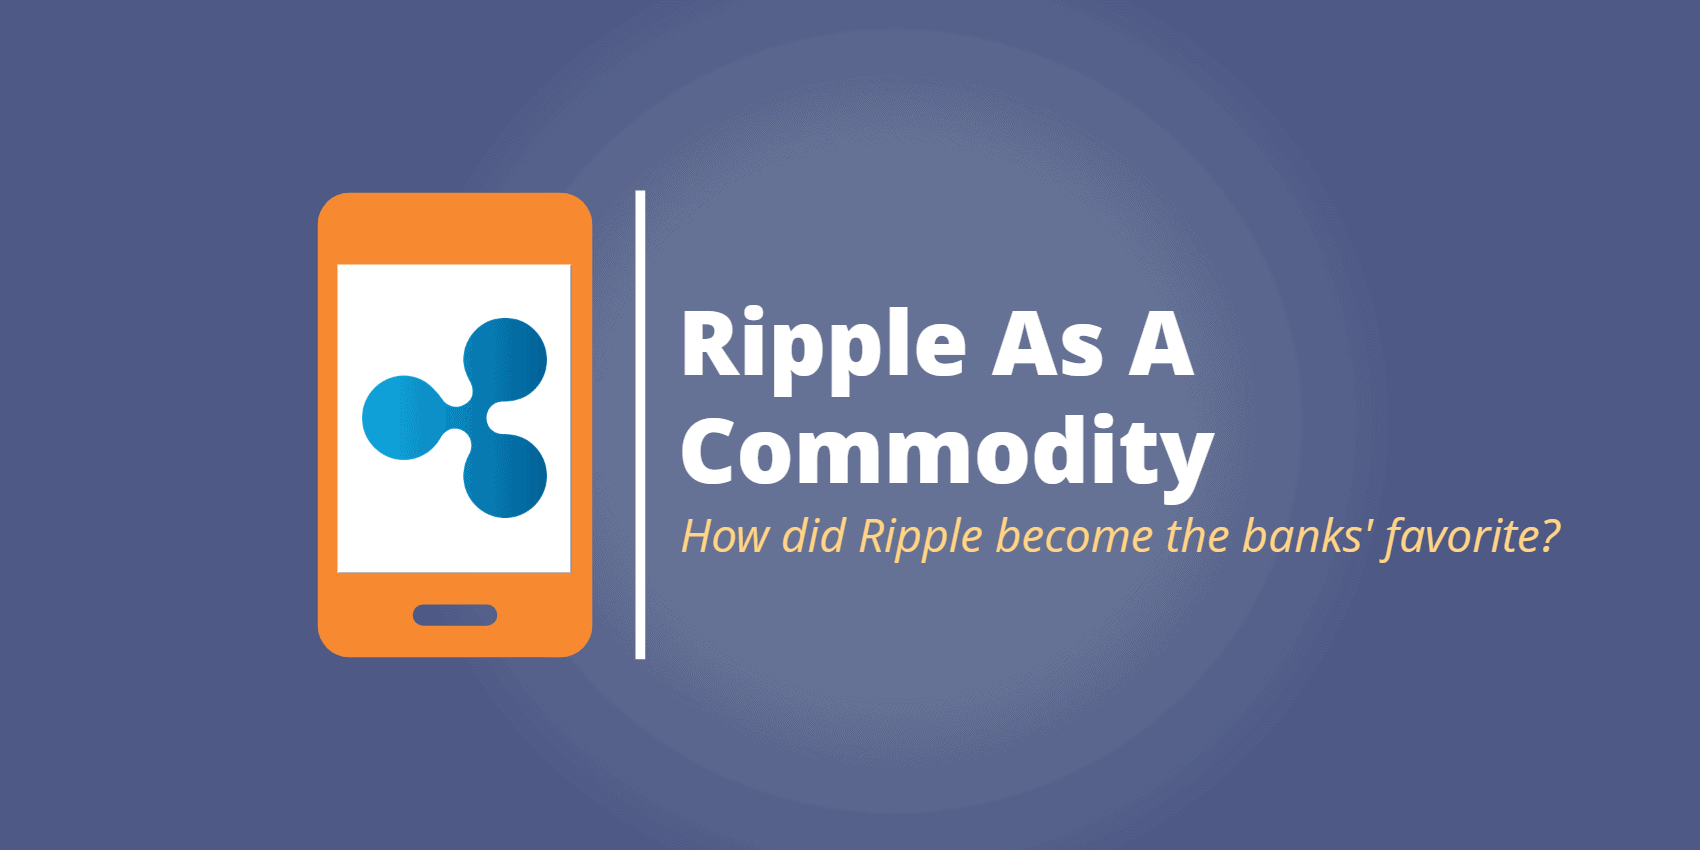 Ripple: Fast Facts About the Altcoin That Got Banks’ Attention - Commodity.com